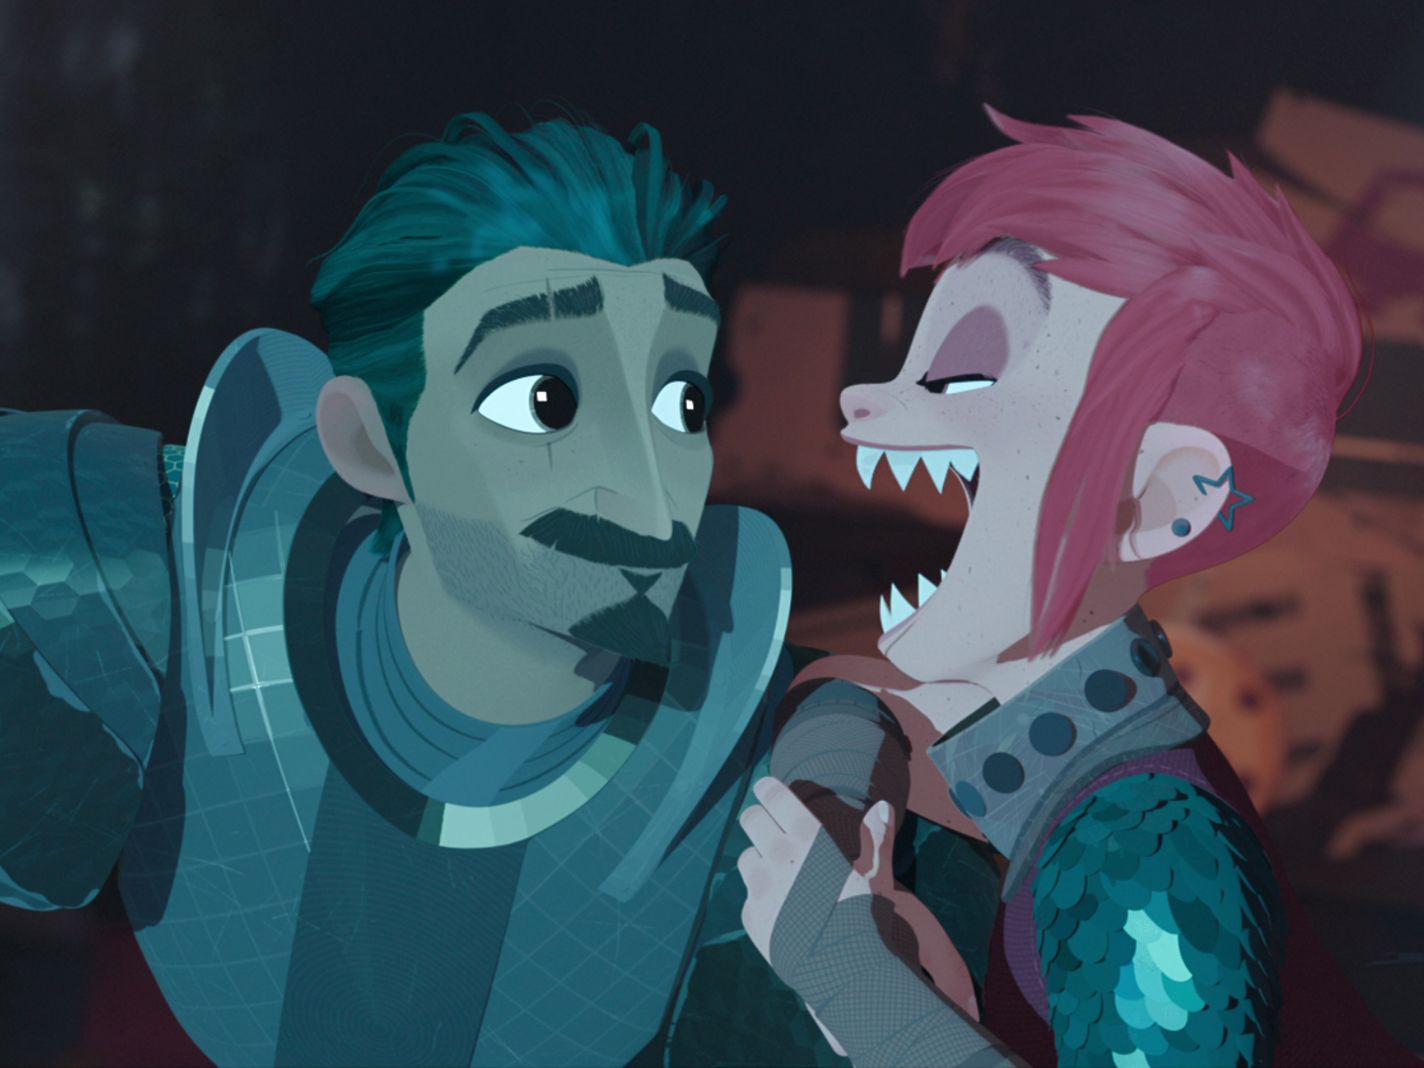 NIMONA - A Knight (Riz Ahmed) is framed for a crime he didn't commit and the only person who can help him prove his innocence is Nimona (Chloë Grace Moretz), a shape-shifting teen who might also be a monster he's sworn to kill. Set in a techno-medieval world unlike anything animation has tackled before, this is a story about the labels we assign to people and the shapeshifter who refuses to be defined by anyone. Cr: Netflix © 2023